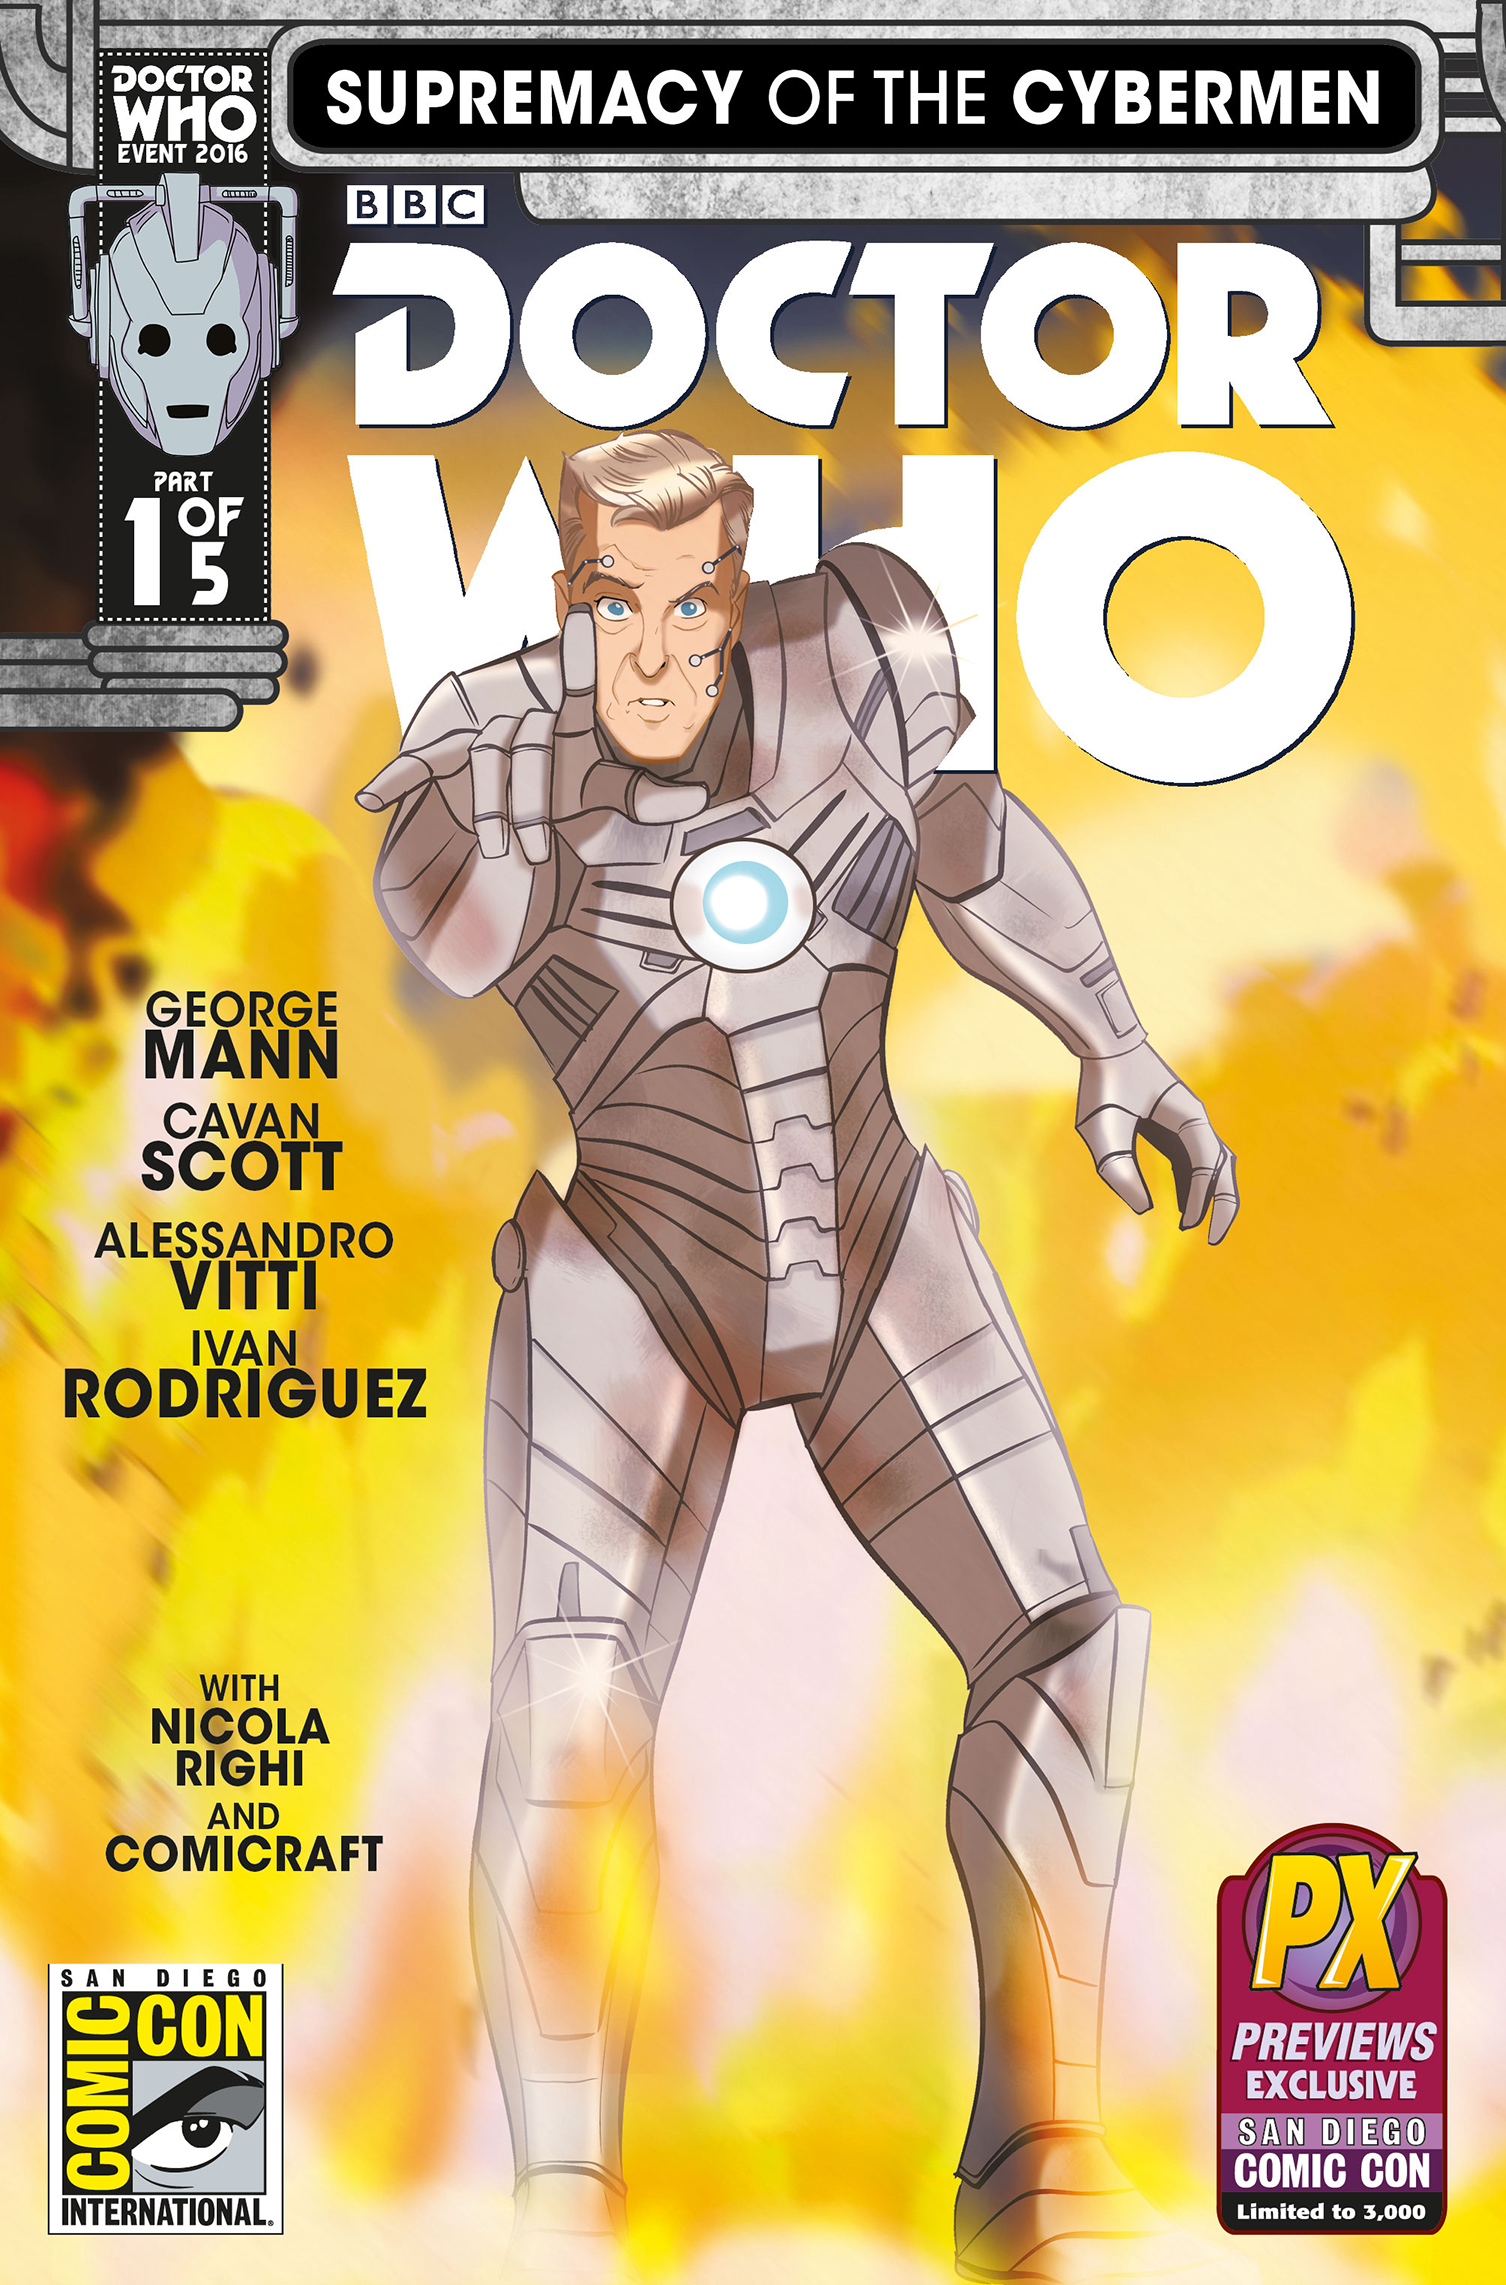 SDCC 2016 DOCTOR WHO SUPREMACY OF THE CYBERMEN #1 (OF 5) (NE